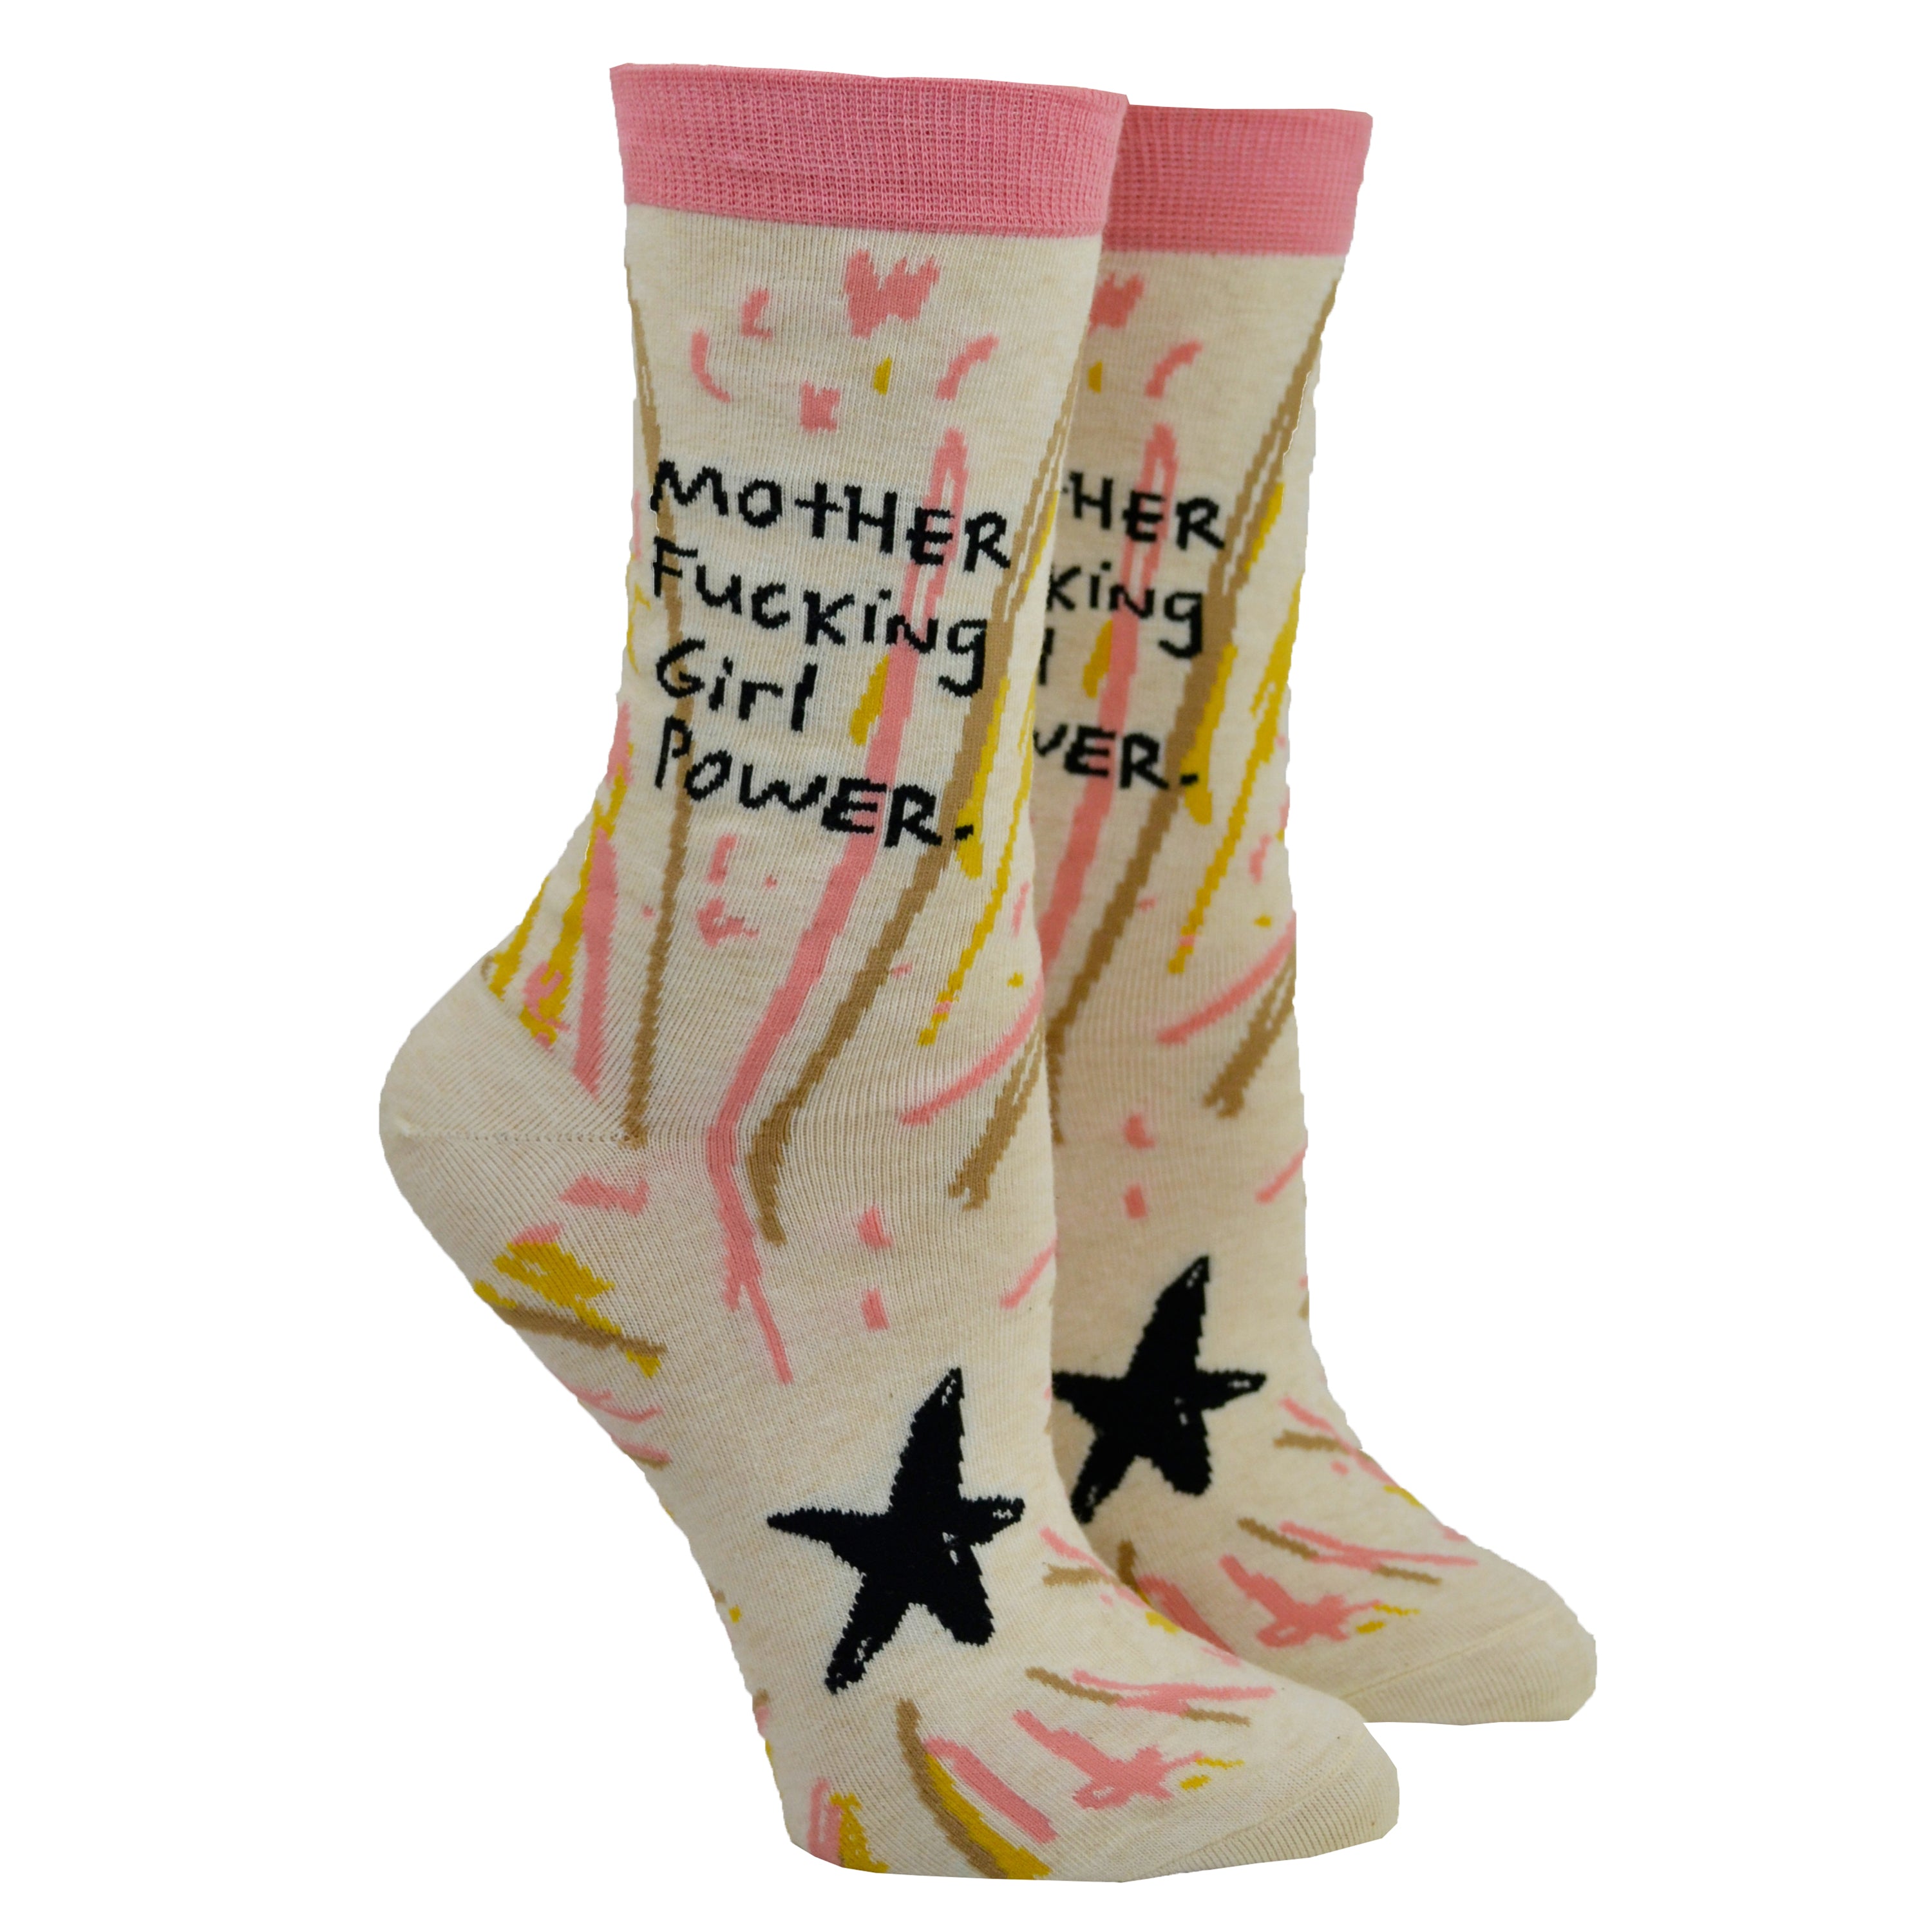 While displayed on mannequin foot forms a pair of women's cream colored cotton socks by Blue Q display 